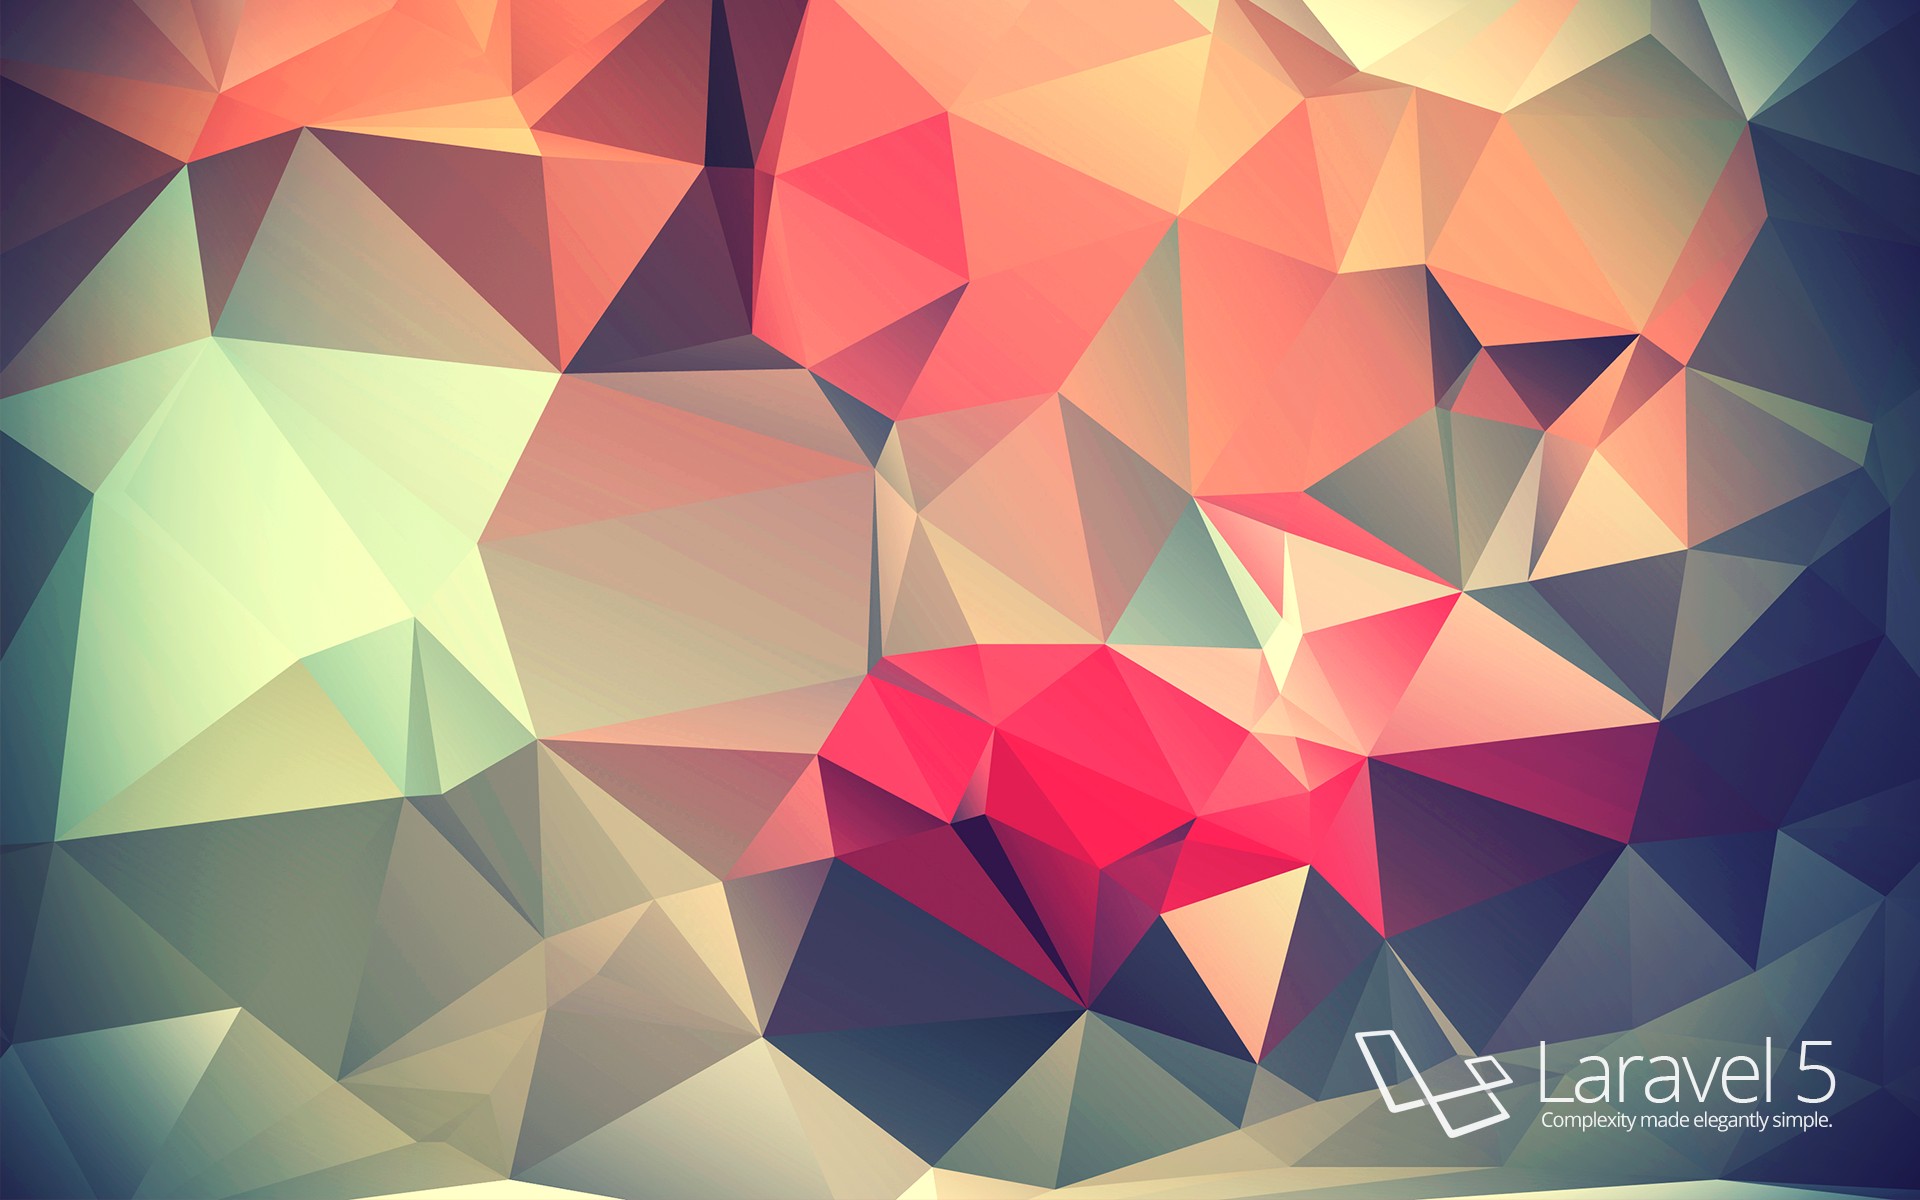 Laravel, Simple, Code, Programming, PHP, Low poly, Minimalism, Colorful Wallpaper